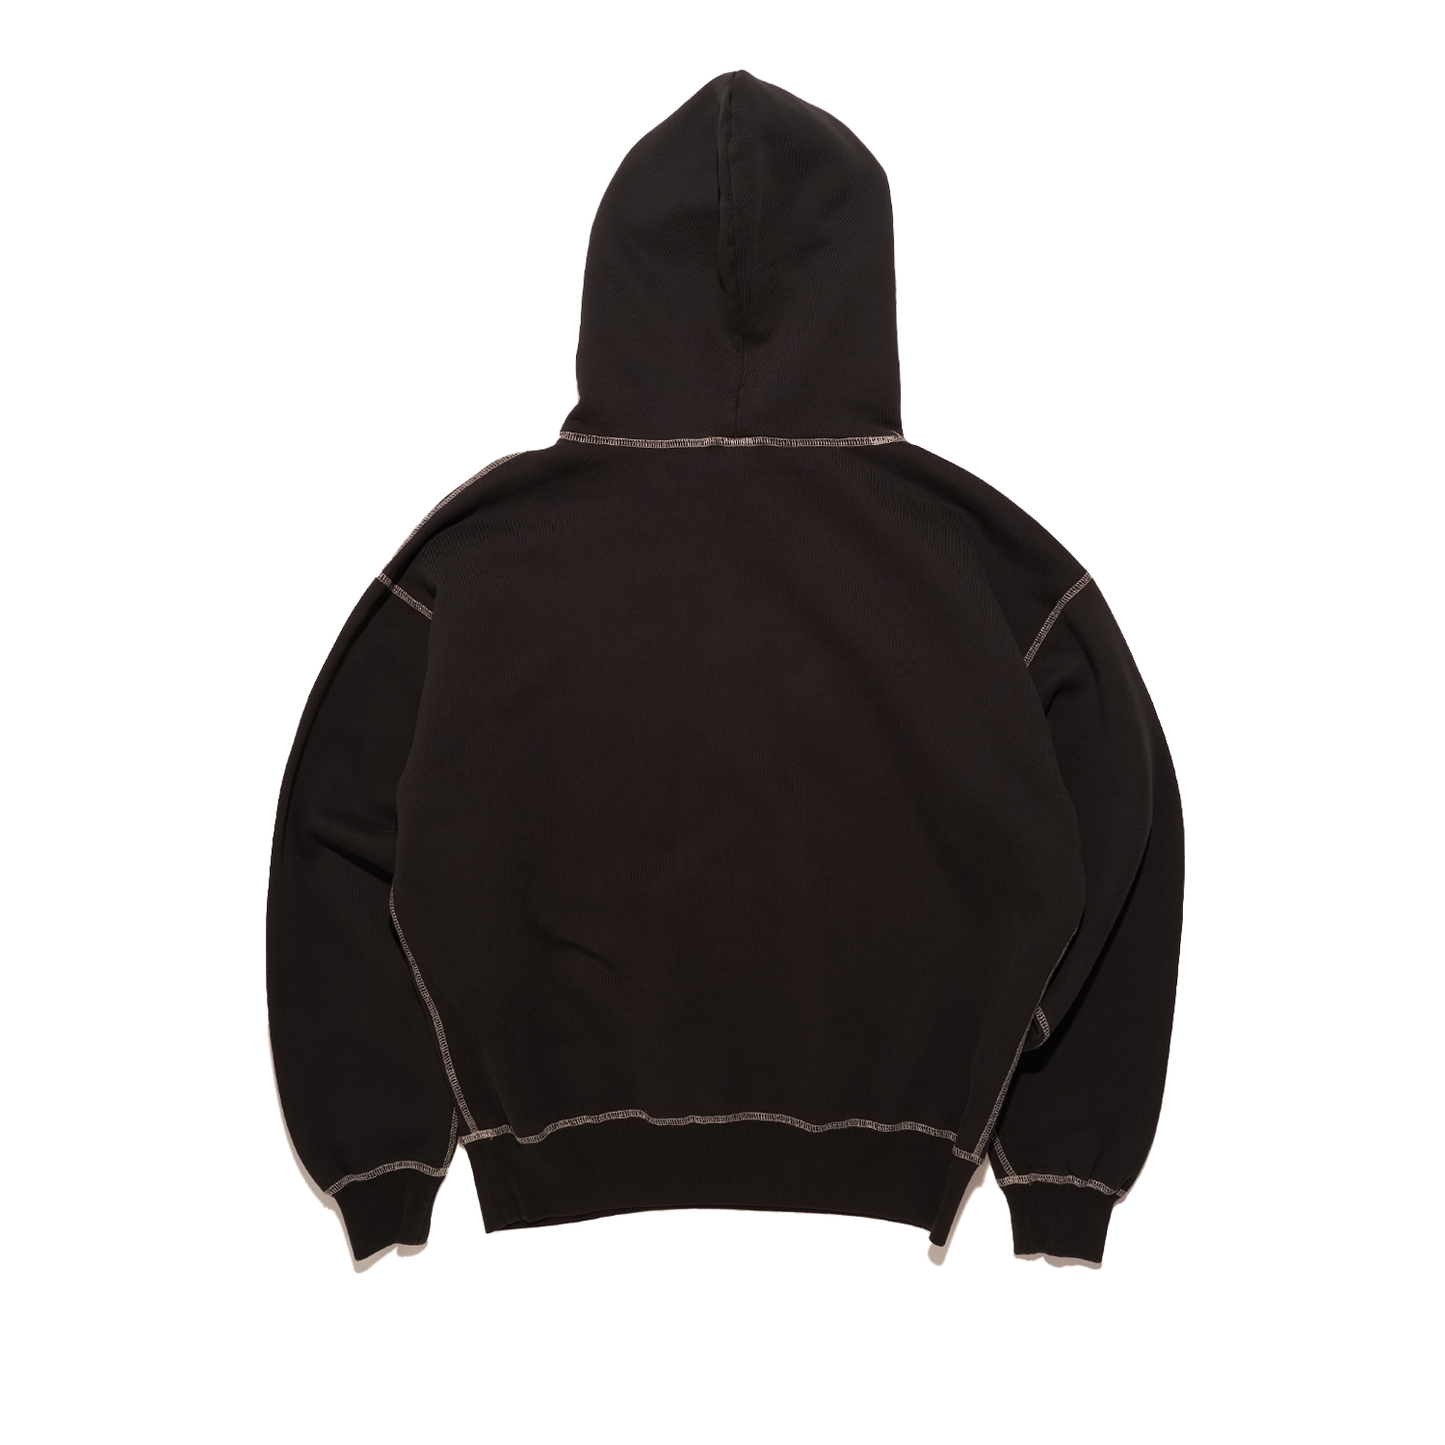 DOE DYED COLLEGE LOGO EMBROIDERY HOODIE